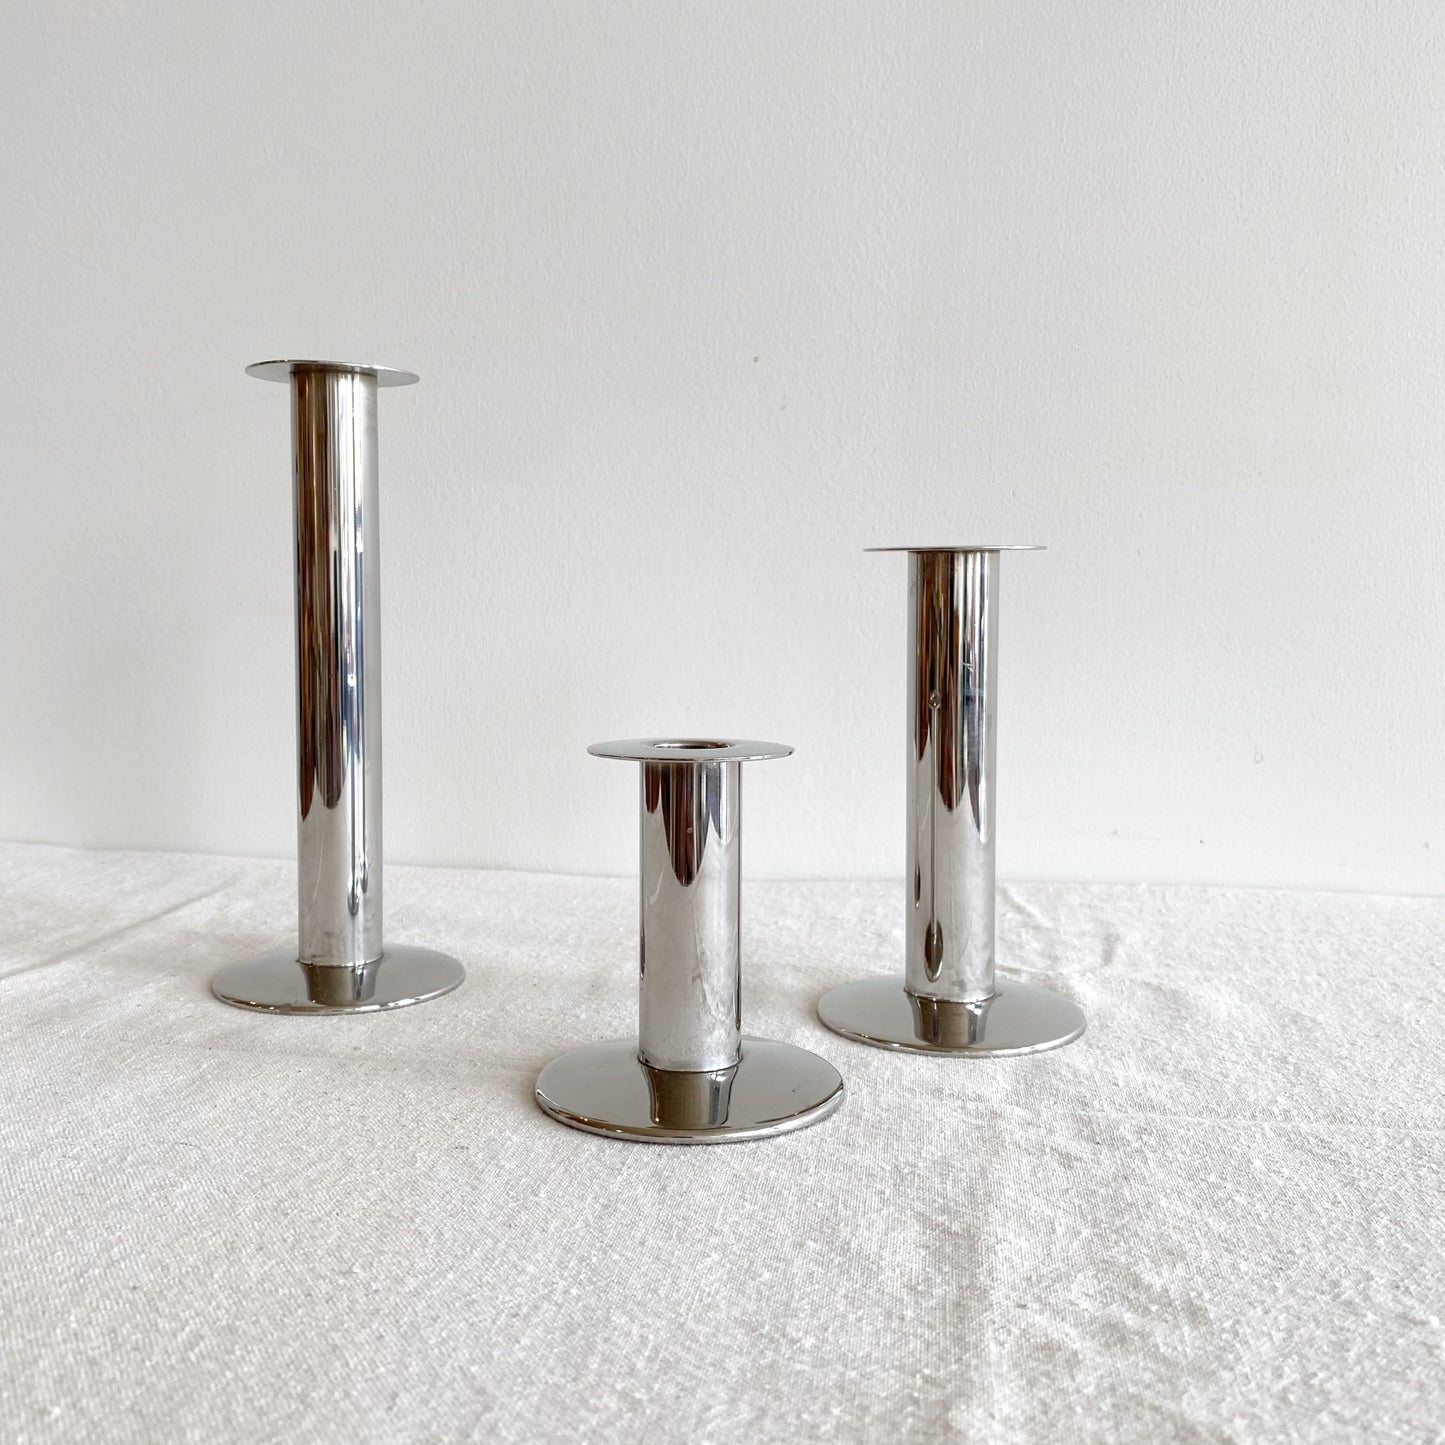 Trio: Vintage Post Modern Silver Candle Holders